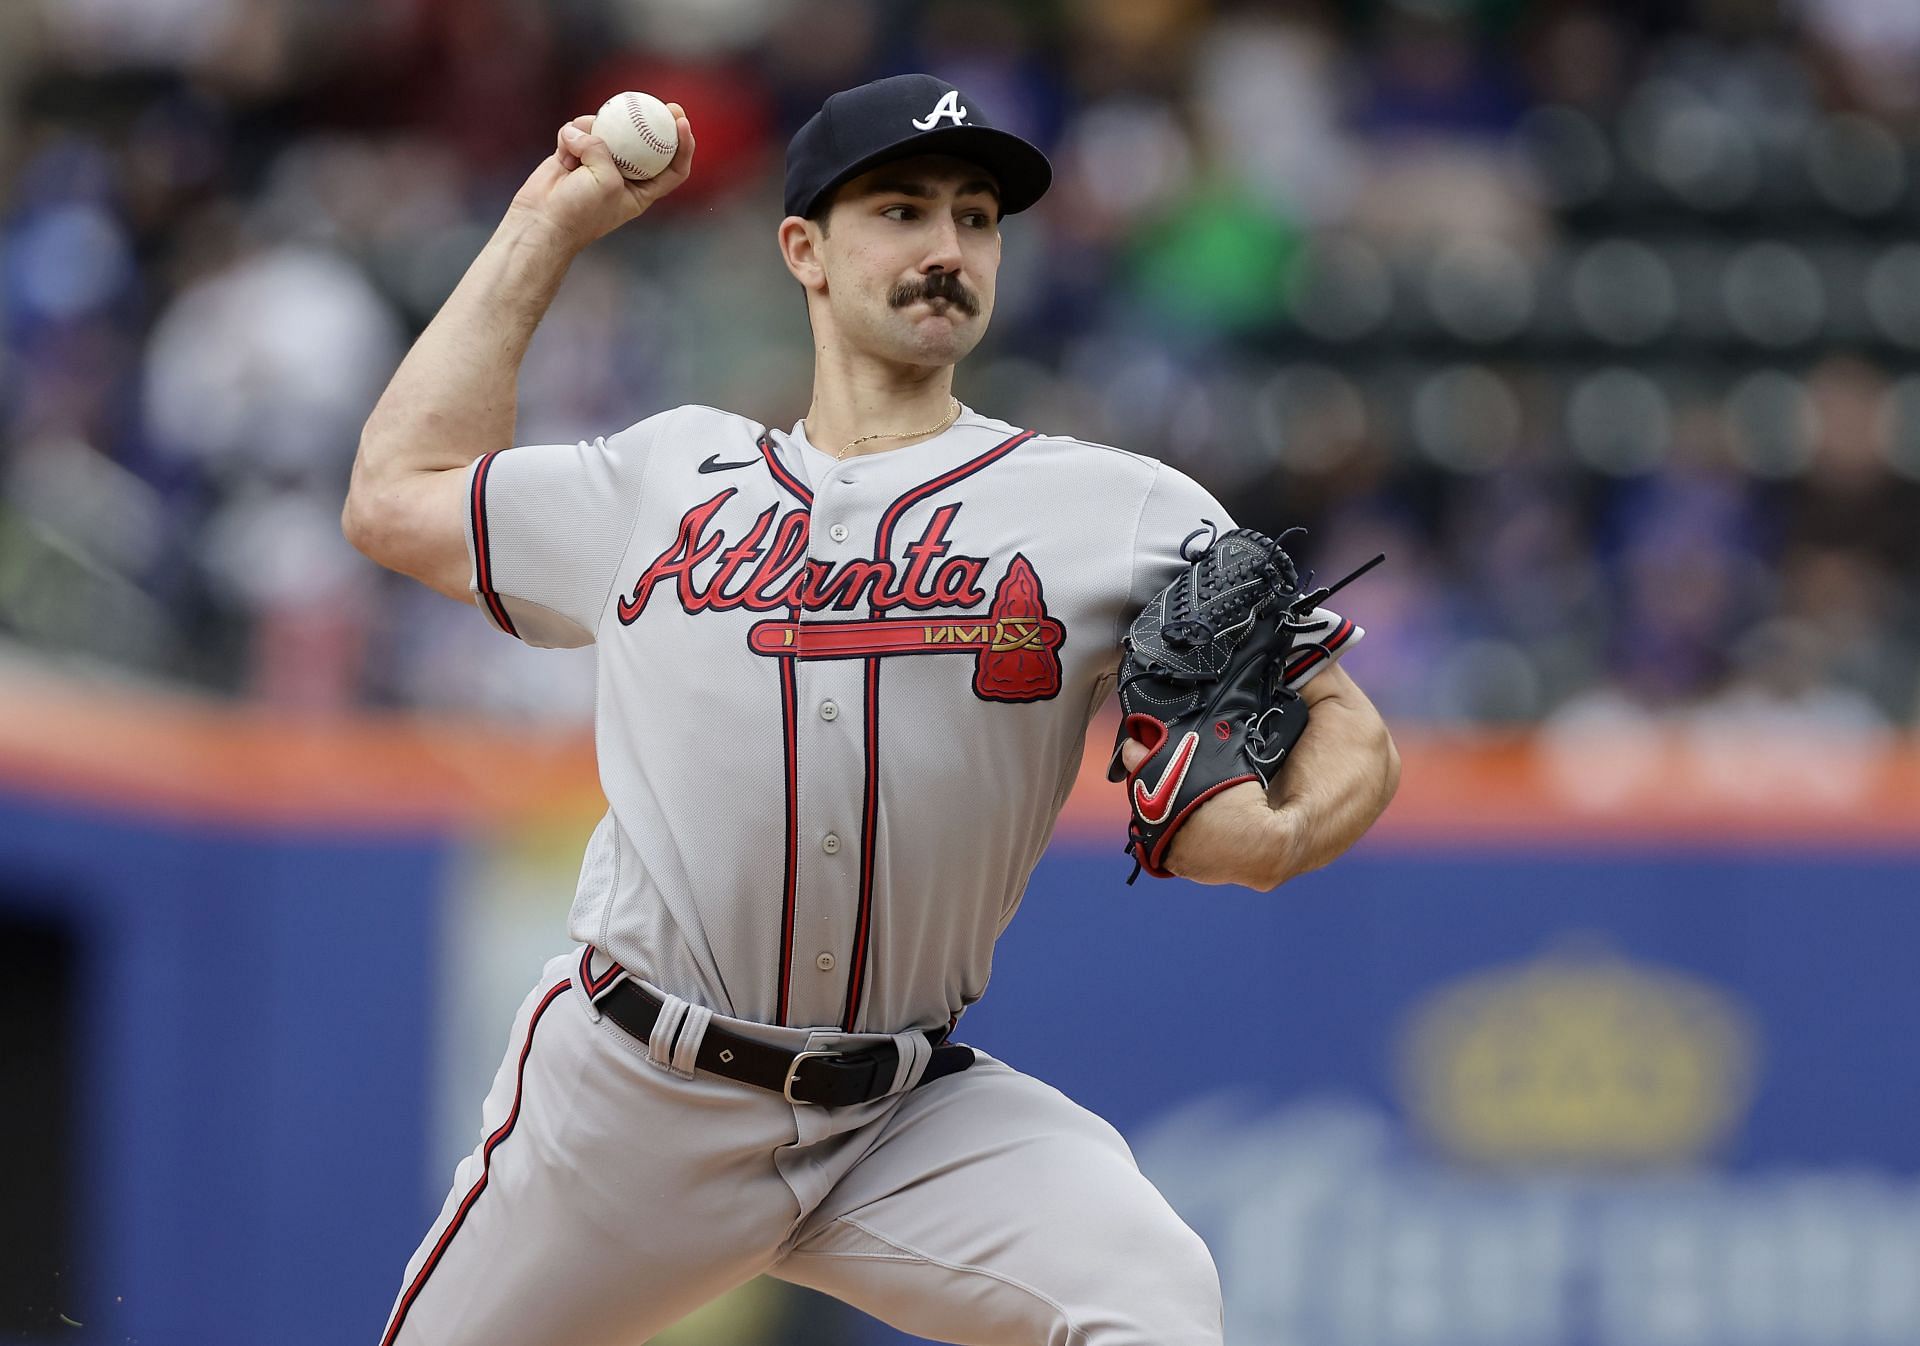 Spencer Strider: Savior of the Braves – 9 Inning Know It All